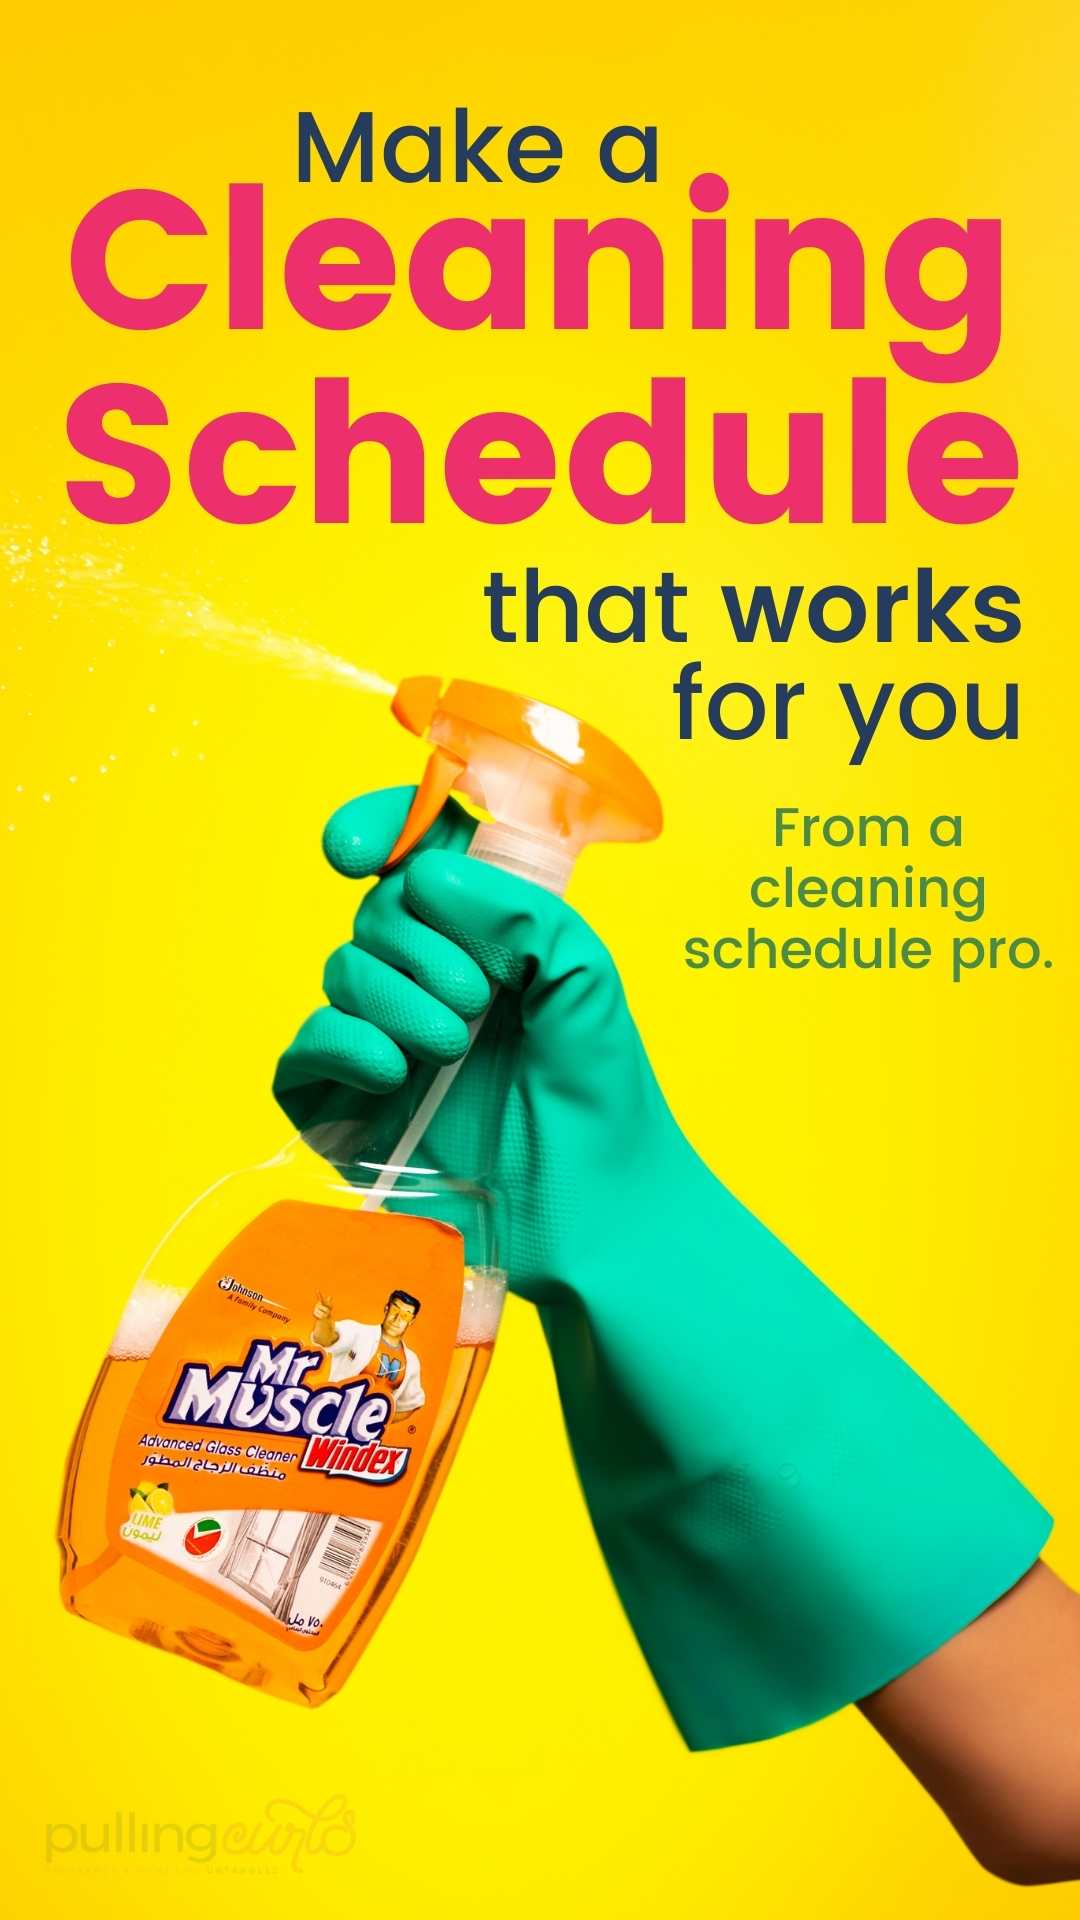 How do you make a cleaning schedule work at YOUR house? Find the right cleaning method to make it just happen in your home. via @pullingcurls